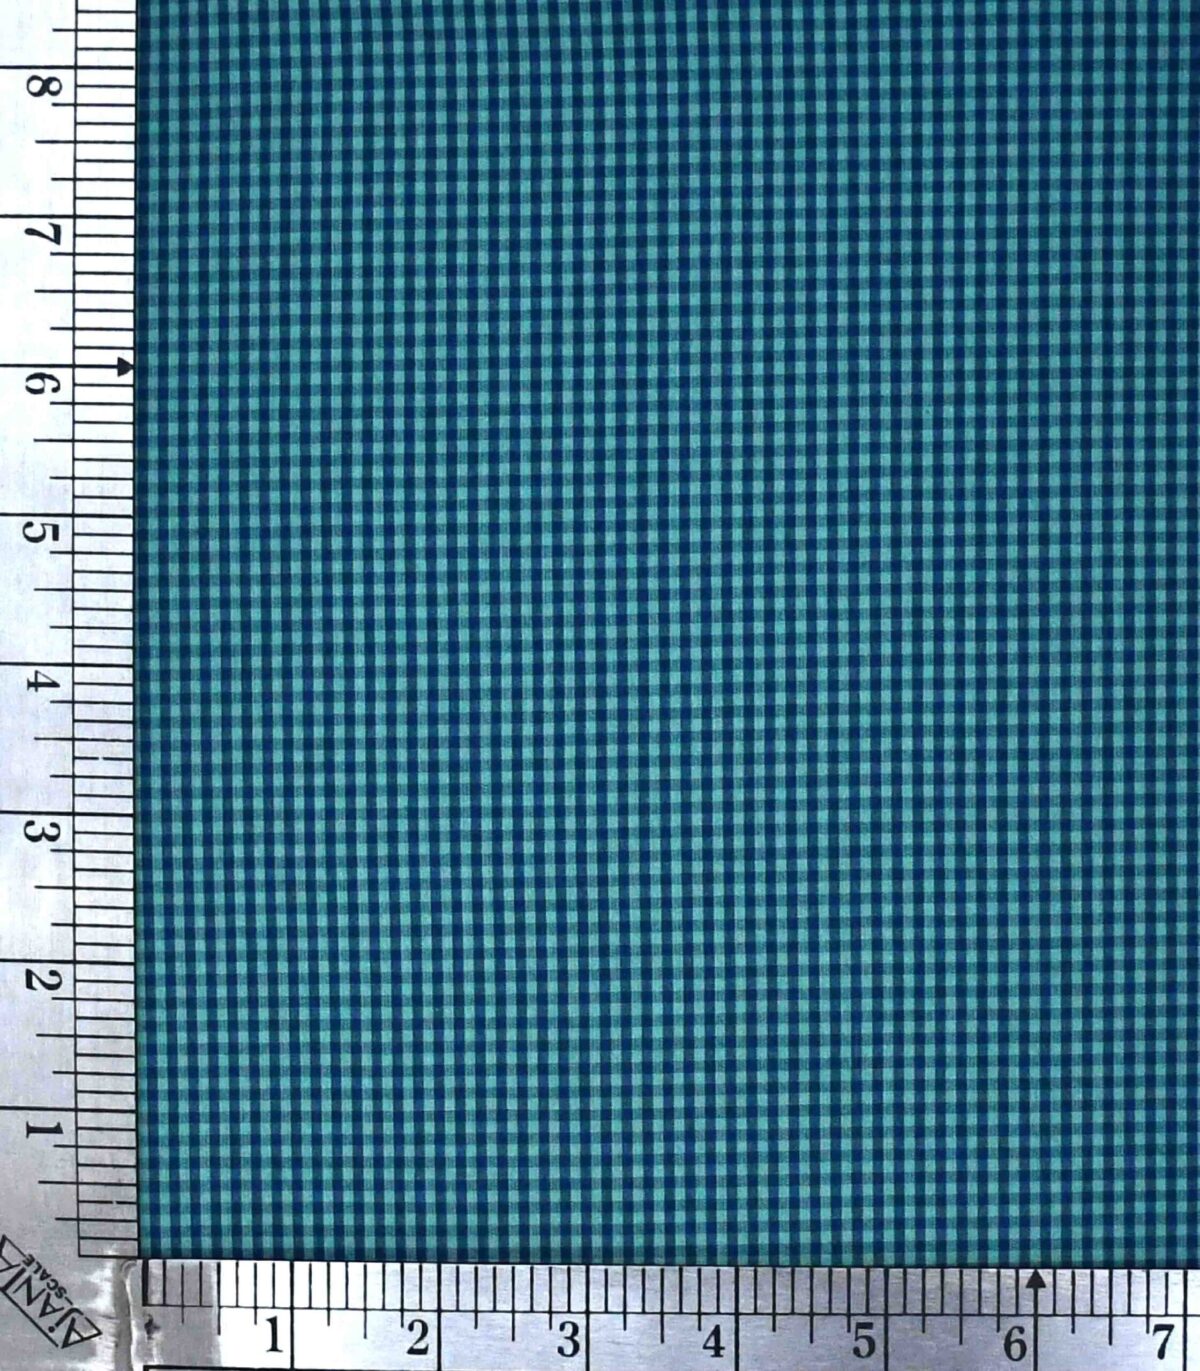 Cotton Green Navy Gingham Check Fabric